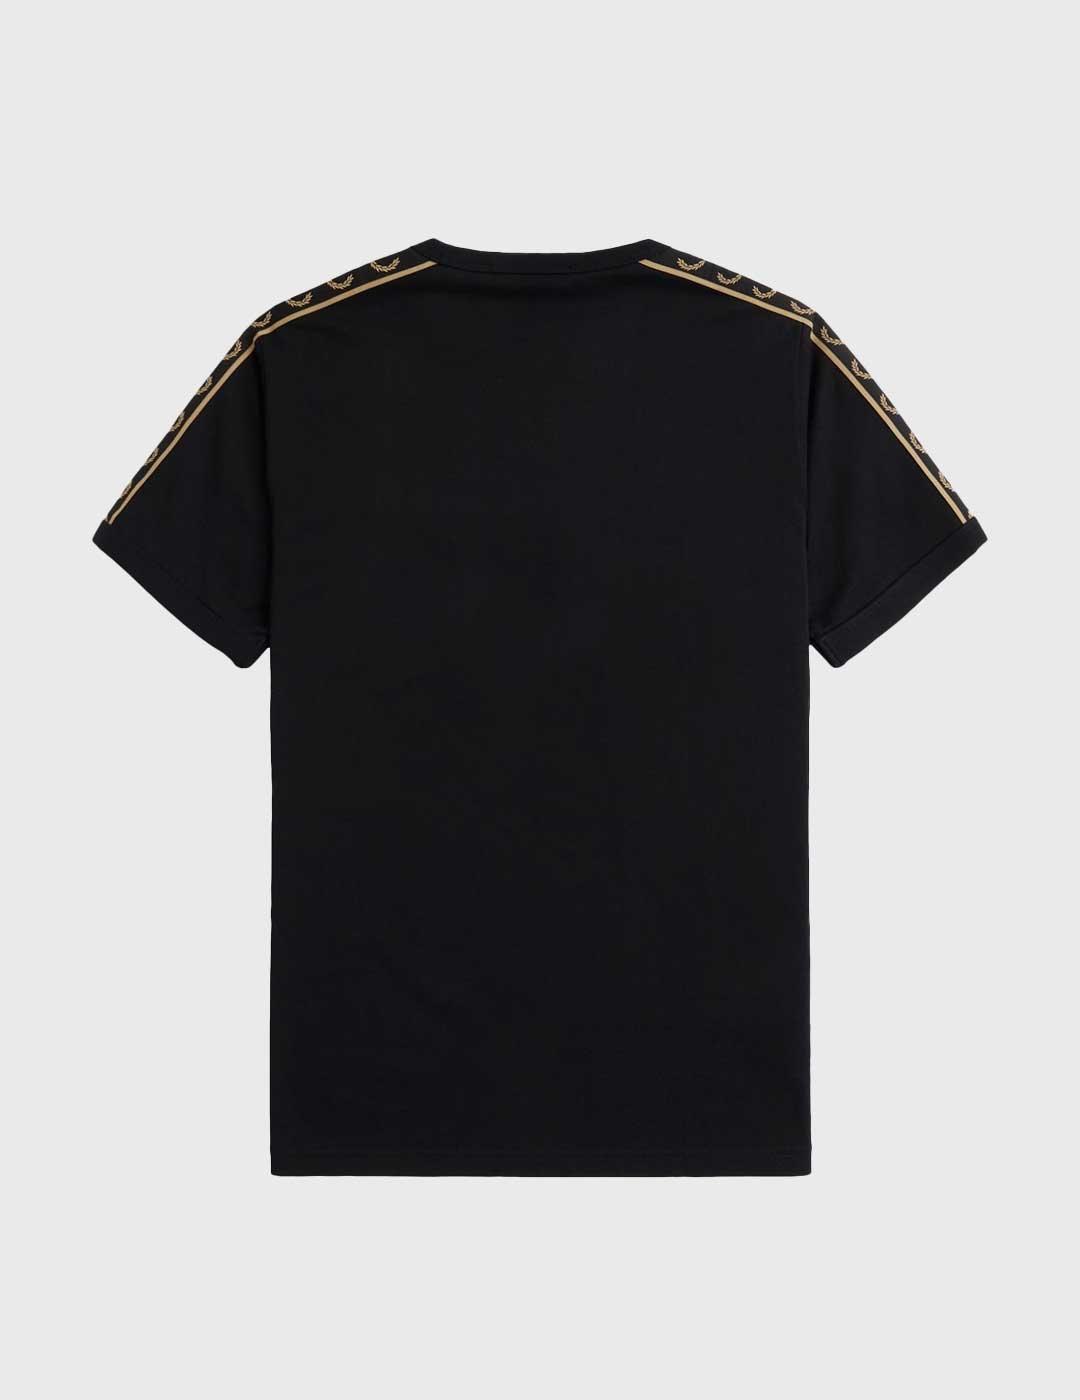 Fred Perry Contrast Tape Ringer Camiseta negra para hombre